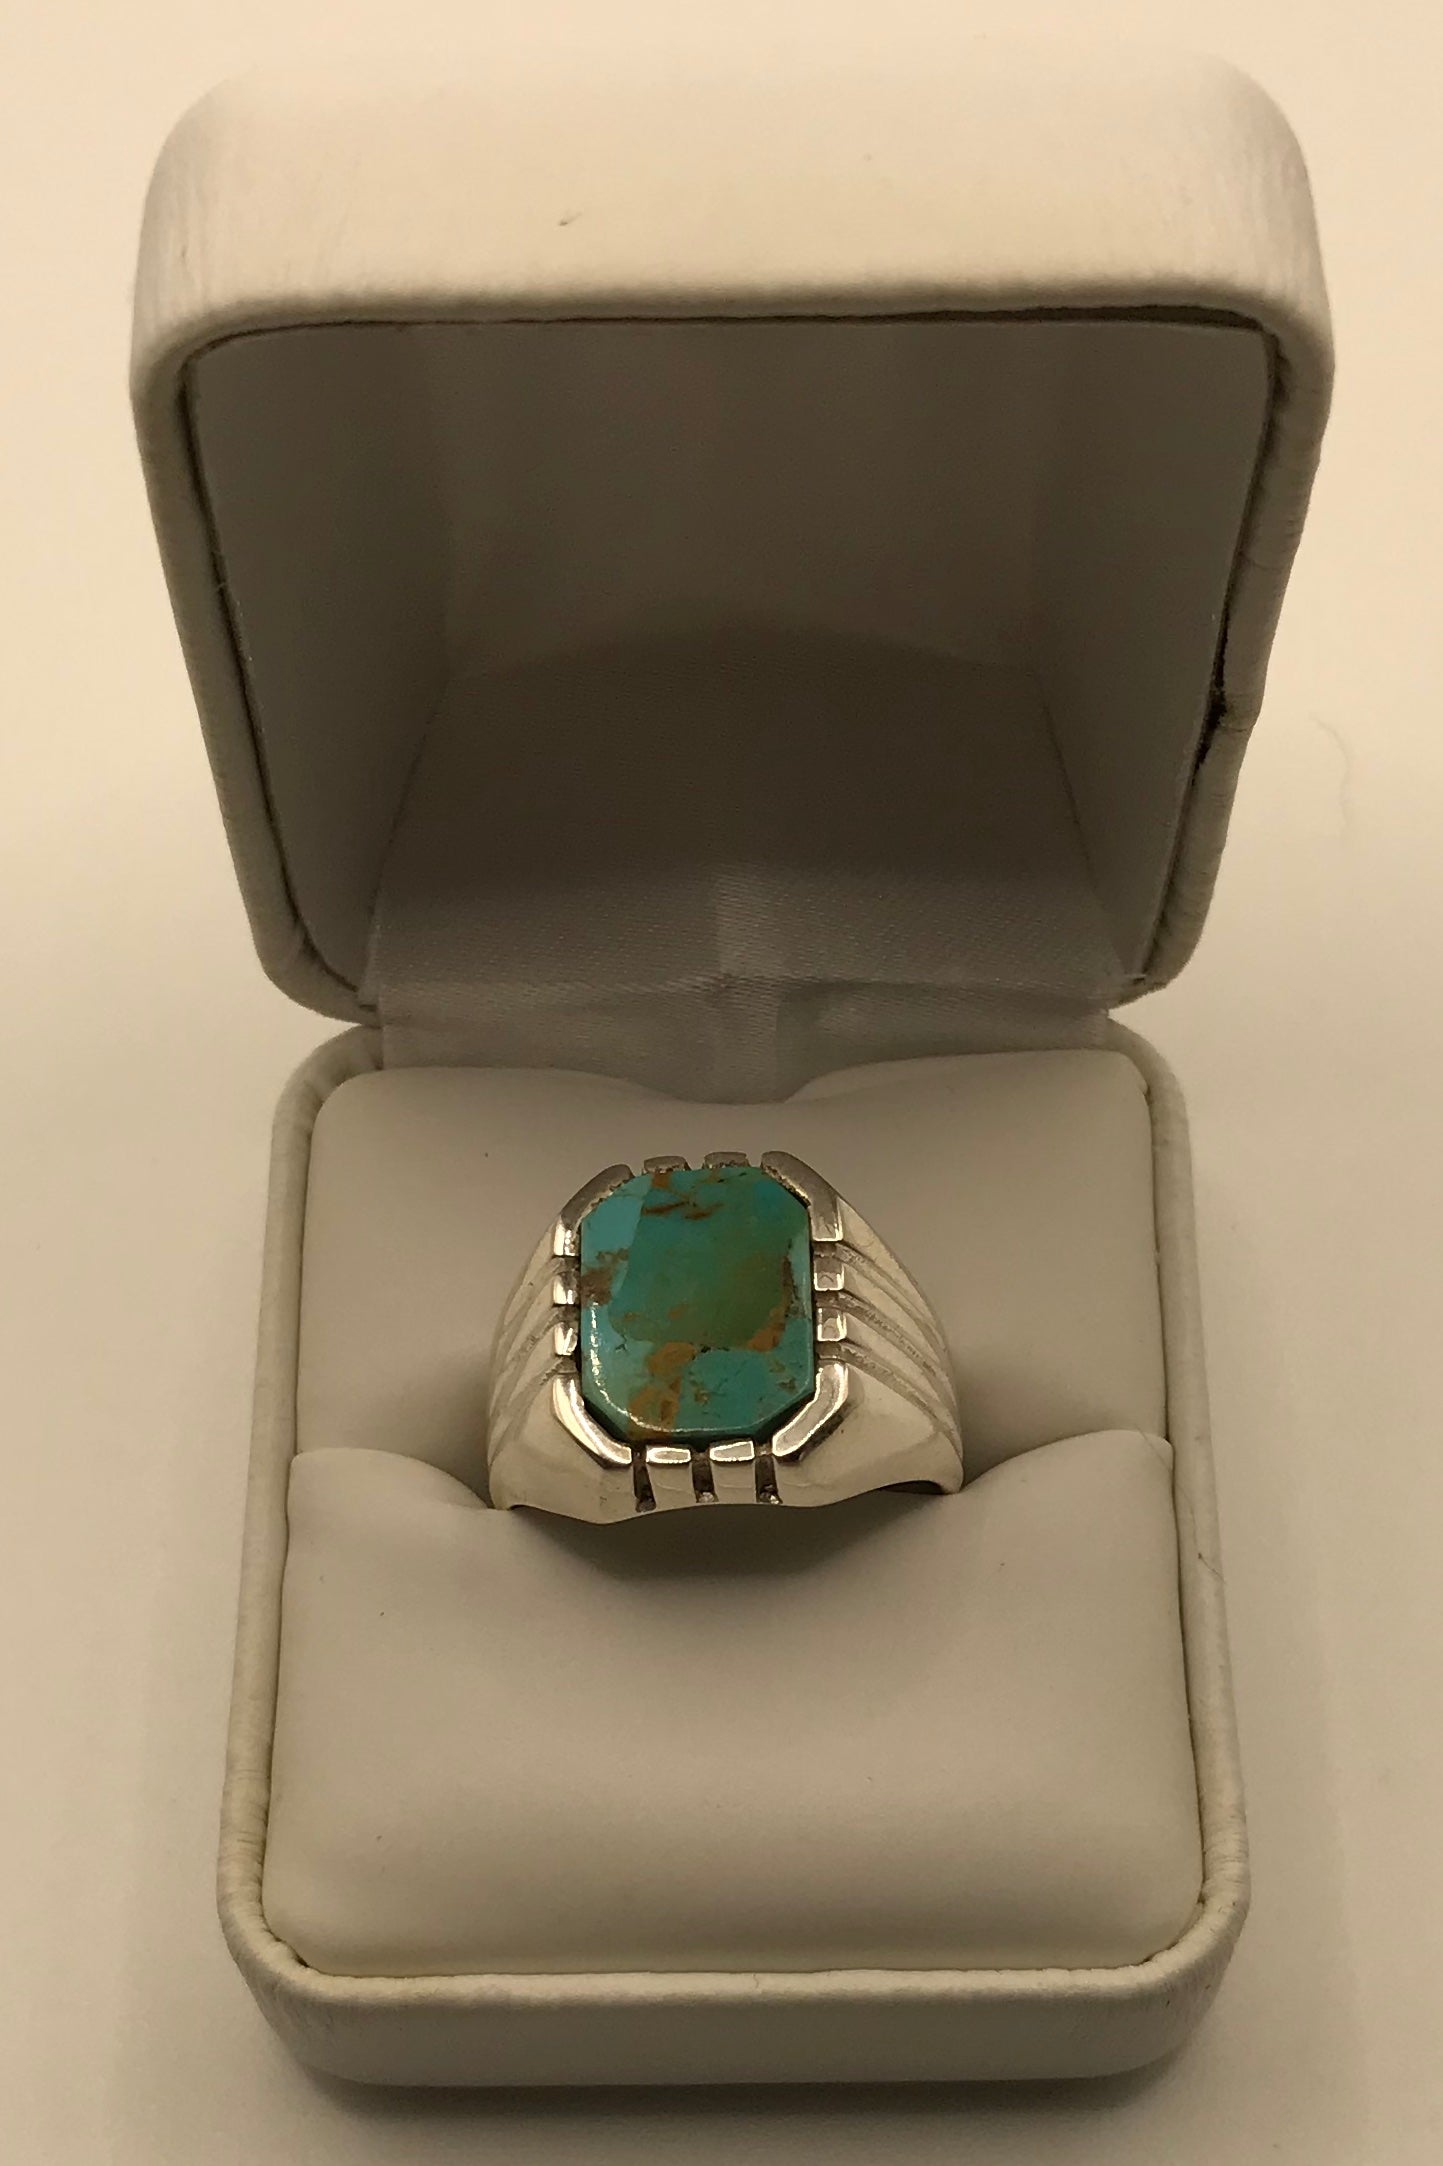 Men's Natural Turquoise Ring Size 10 or 11